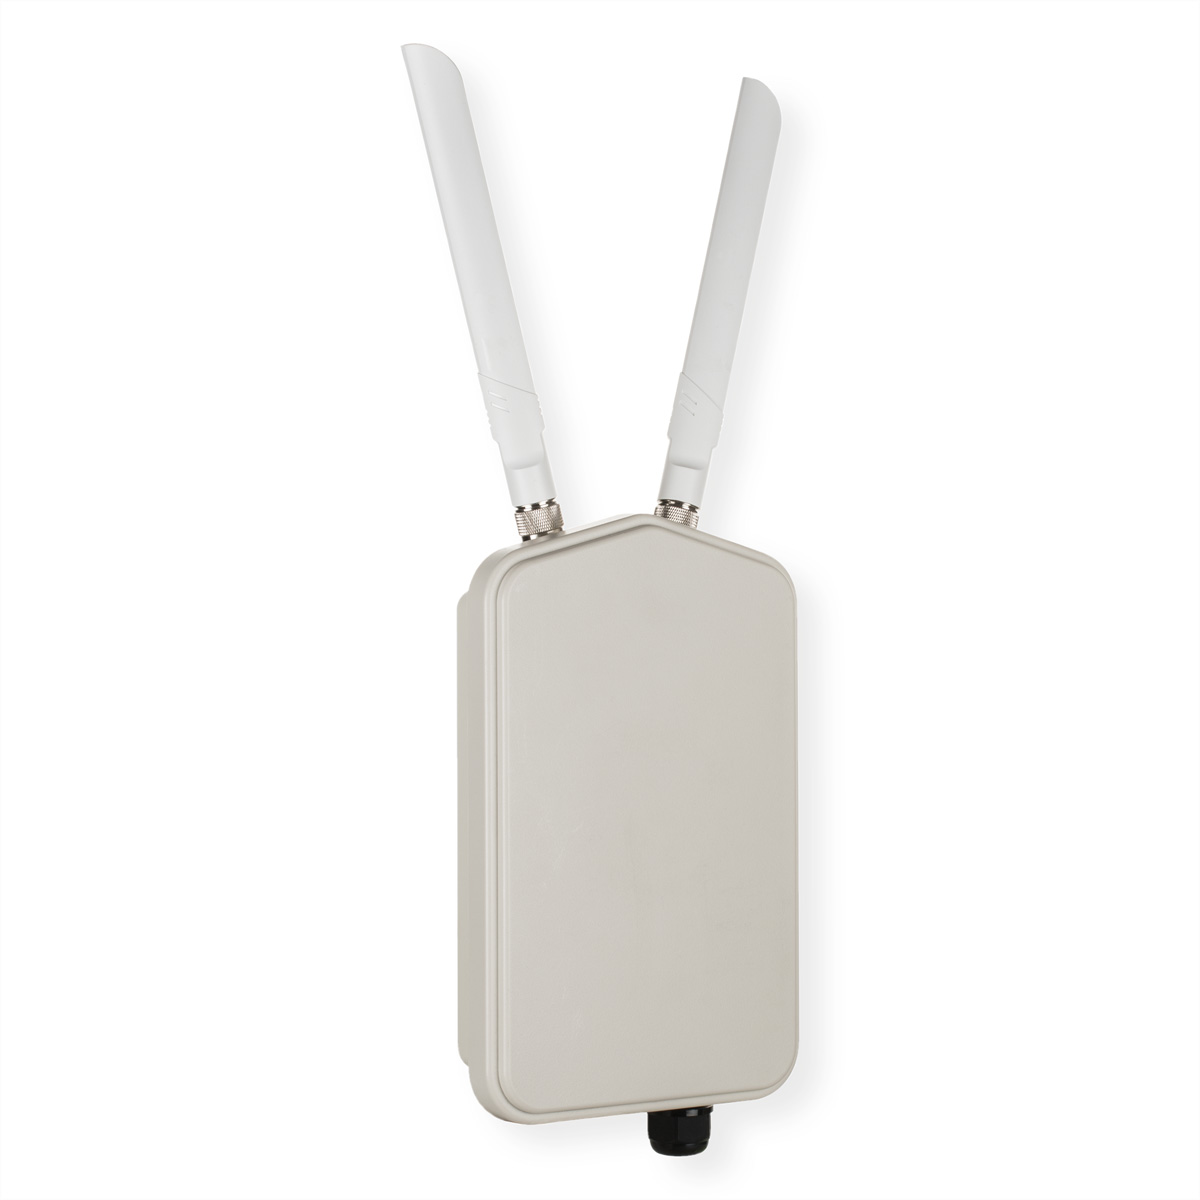 D-LINK DWL-8720AP 2 Outdoor Band Wave Unified Dual Access Gbit/s 1,3 Point AC1300 Point Access